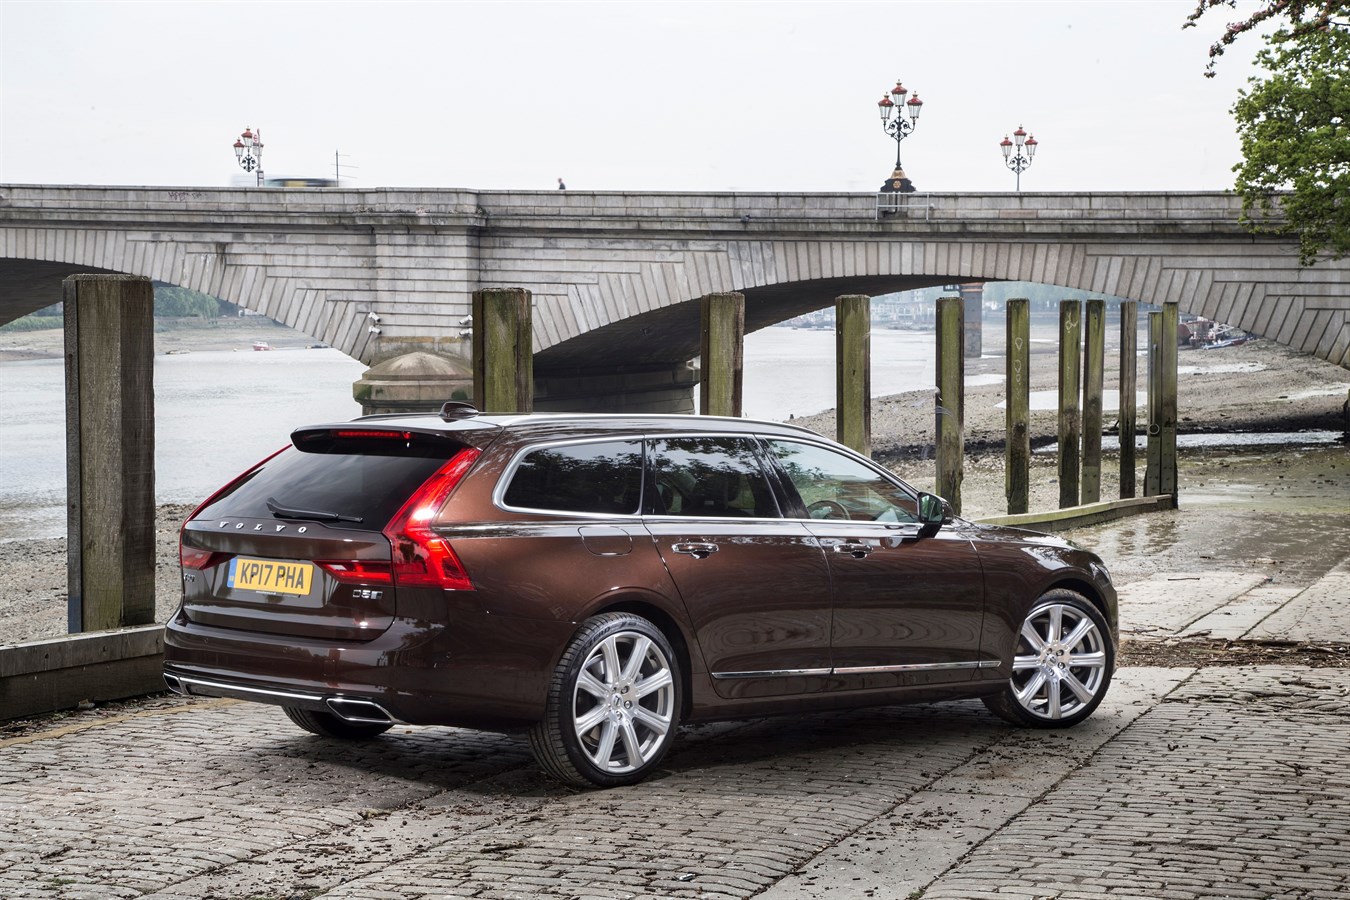 Volvo V90 designed by Thomas Ingenlath, who was voted 'Design Hero' at Autocar Awards 2017